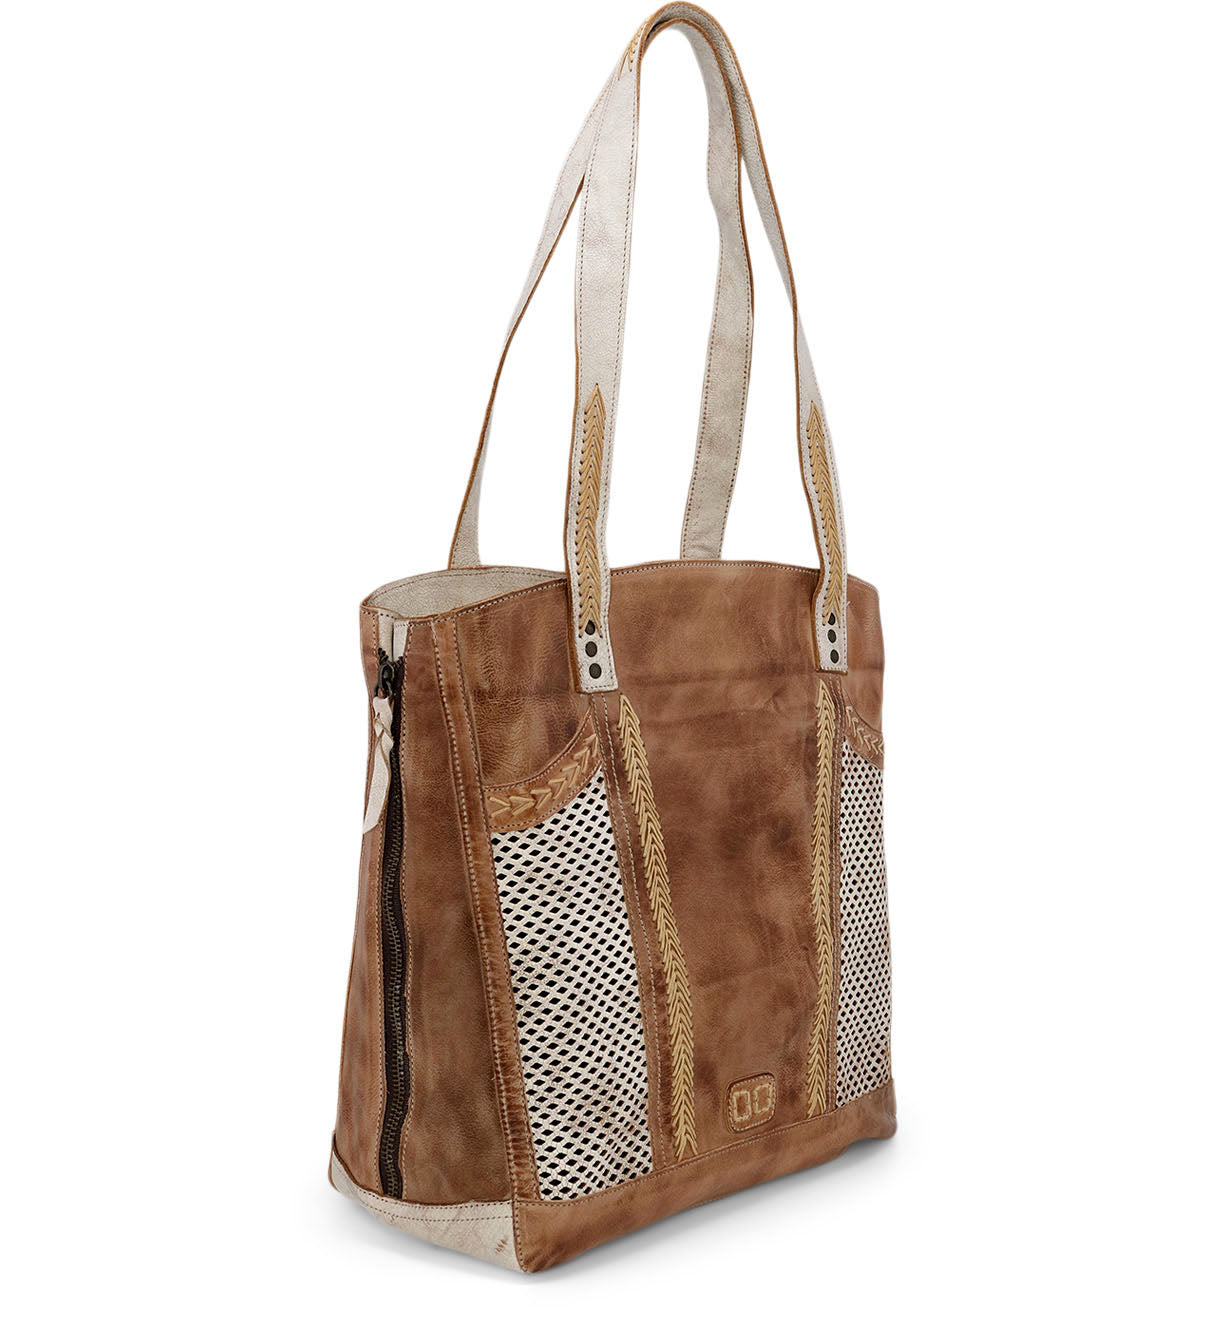 The Amelie, Bed Stu women's brown leather tote bag.